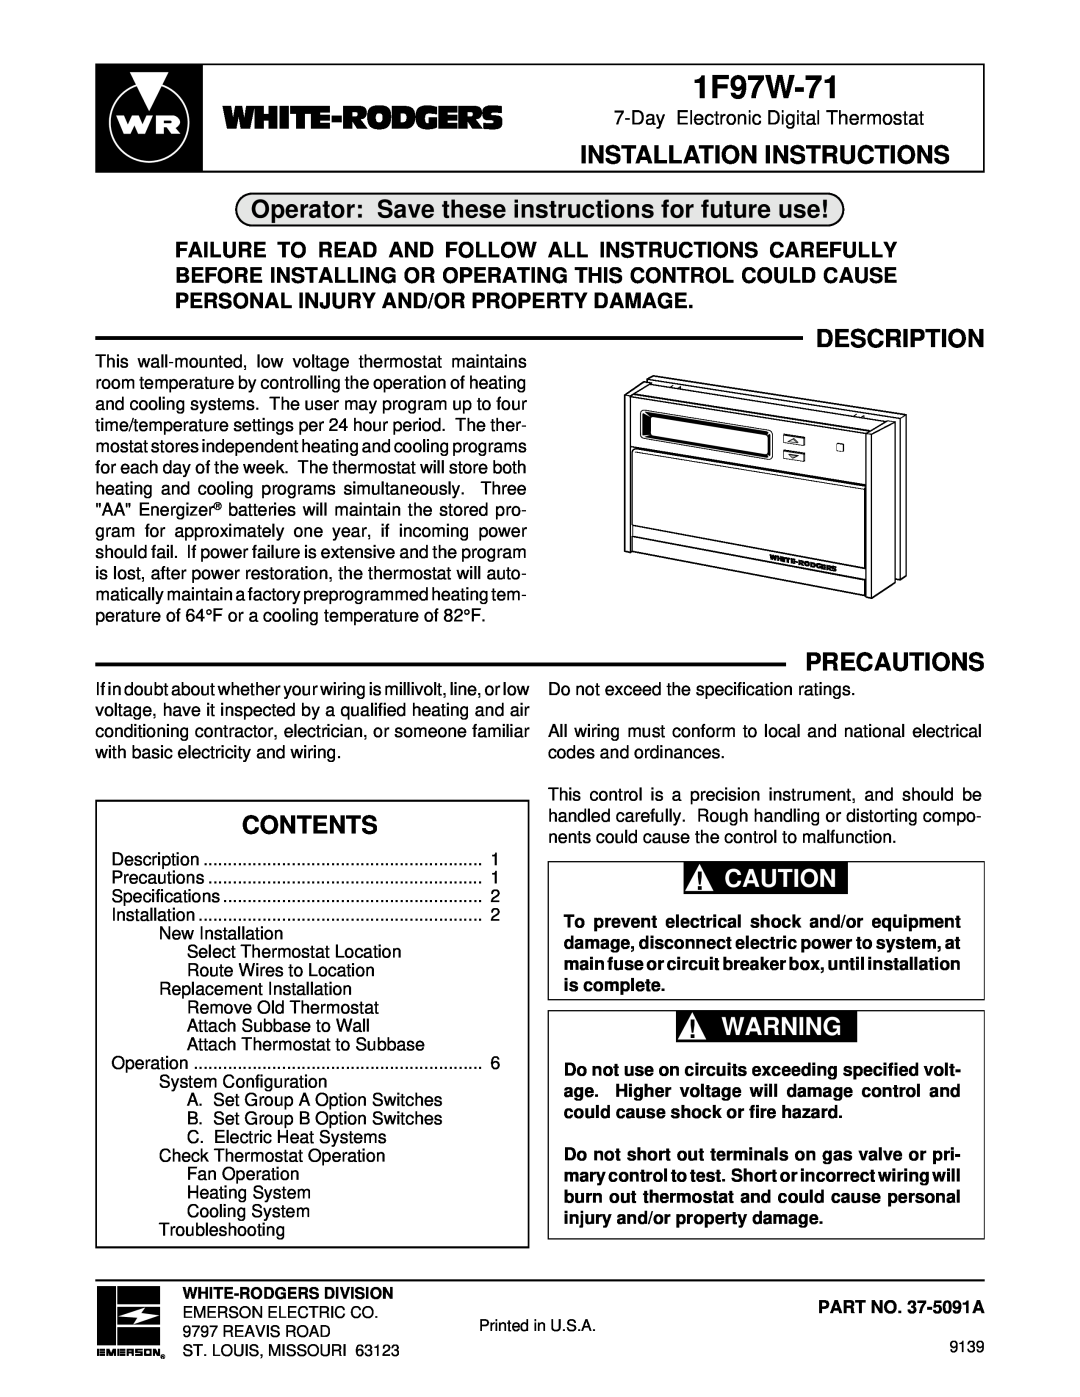 White Rodgers 1F97W-71 installation instructions Operator Save these instructions for future use, Description, Precautions 